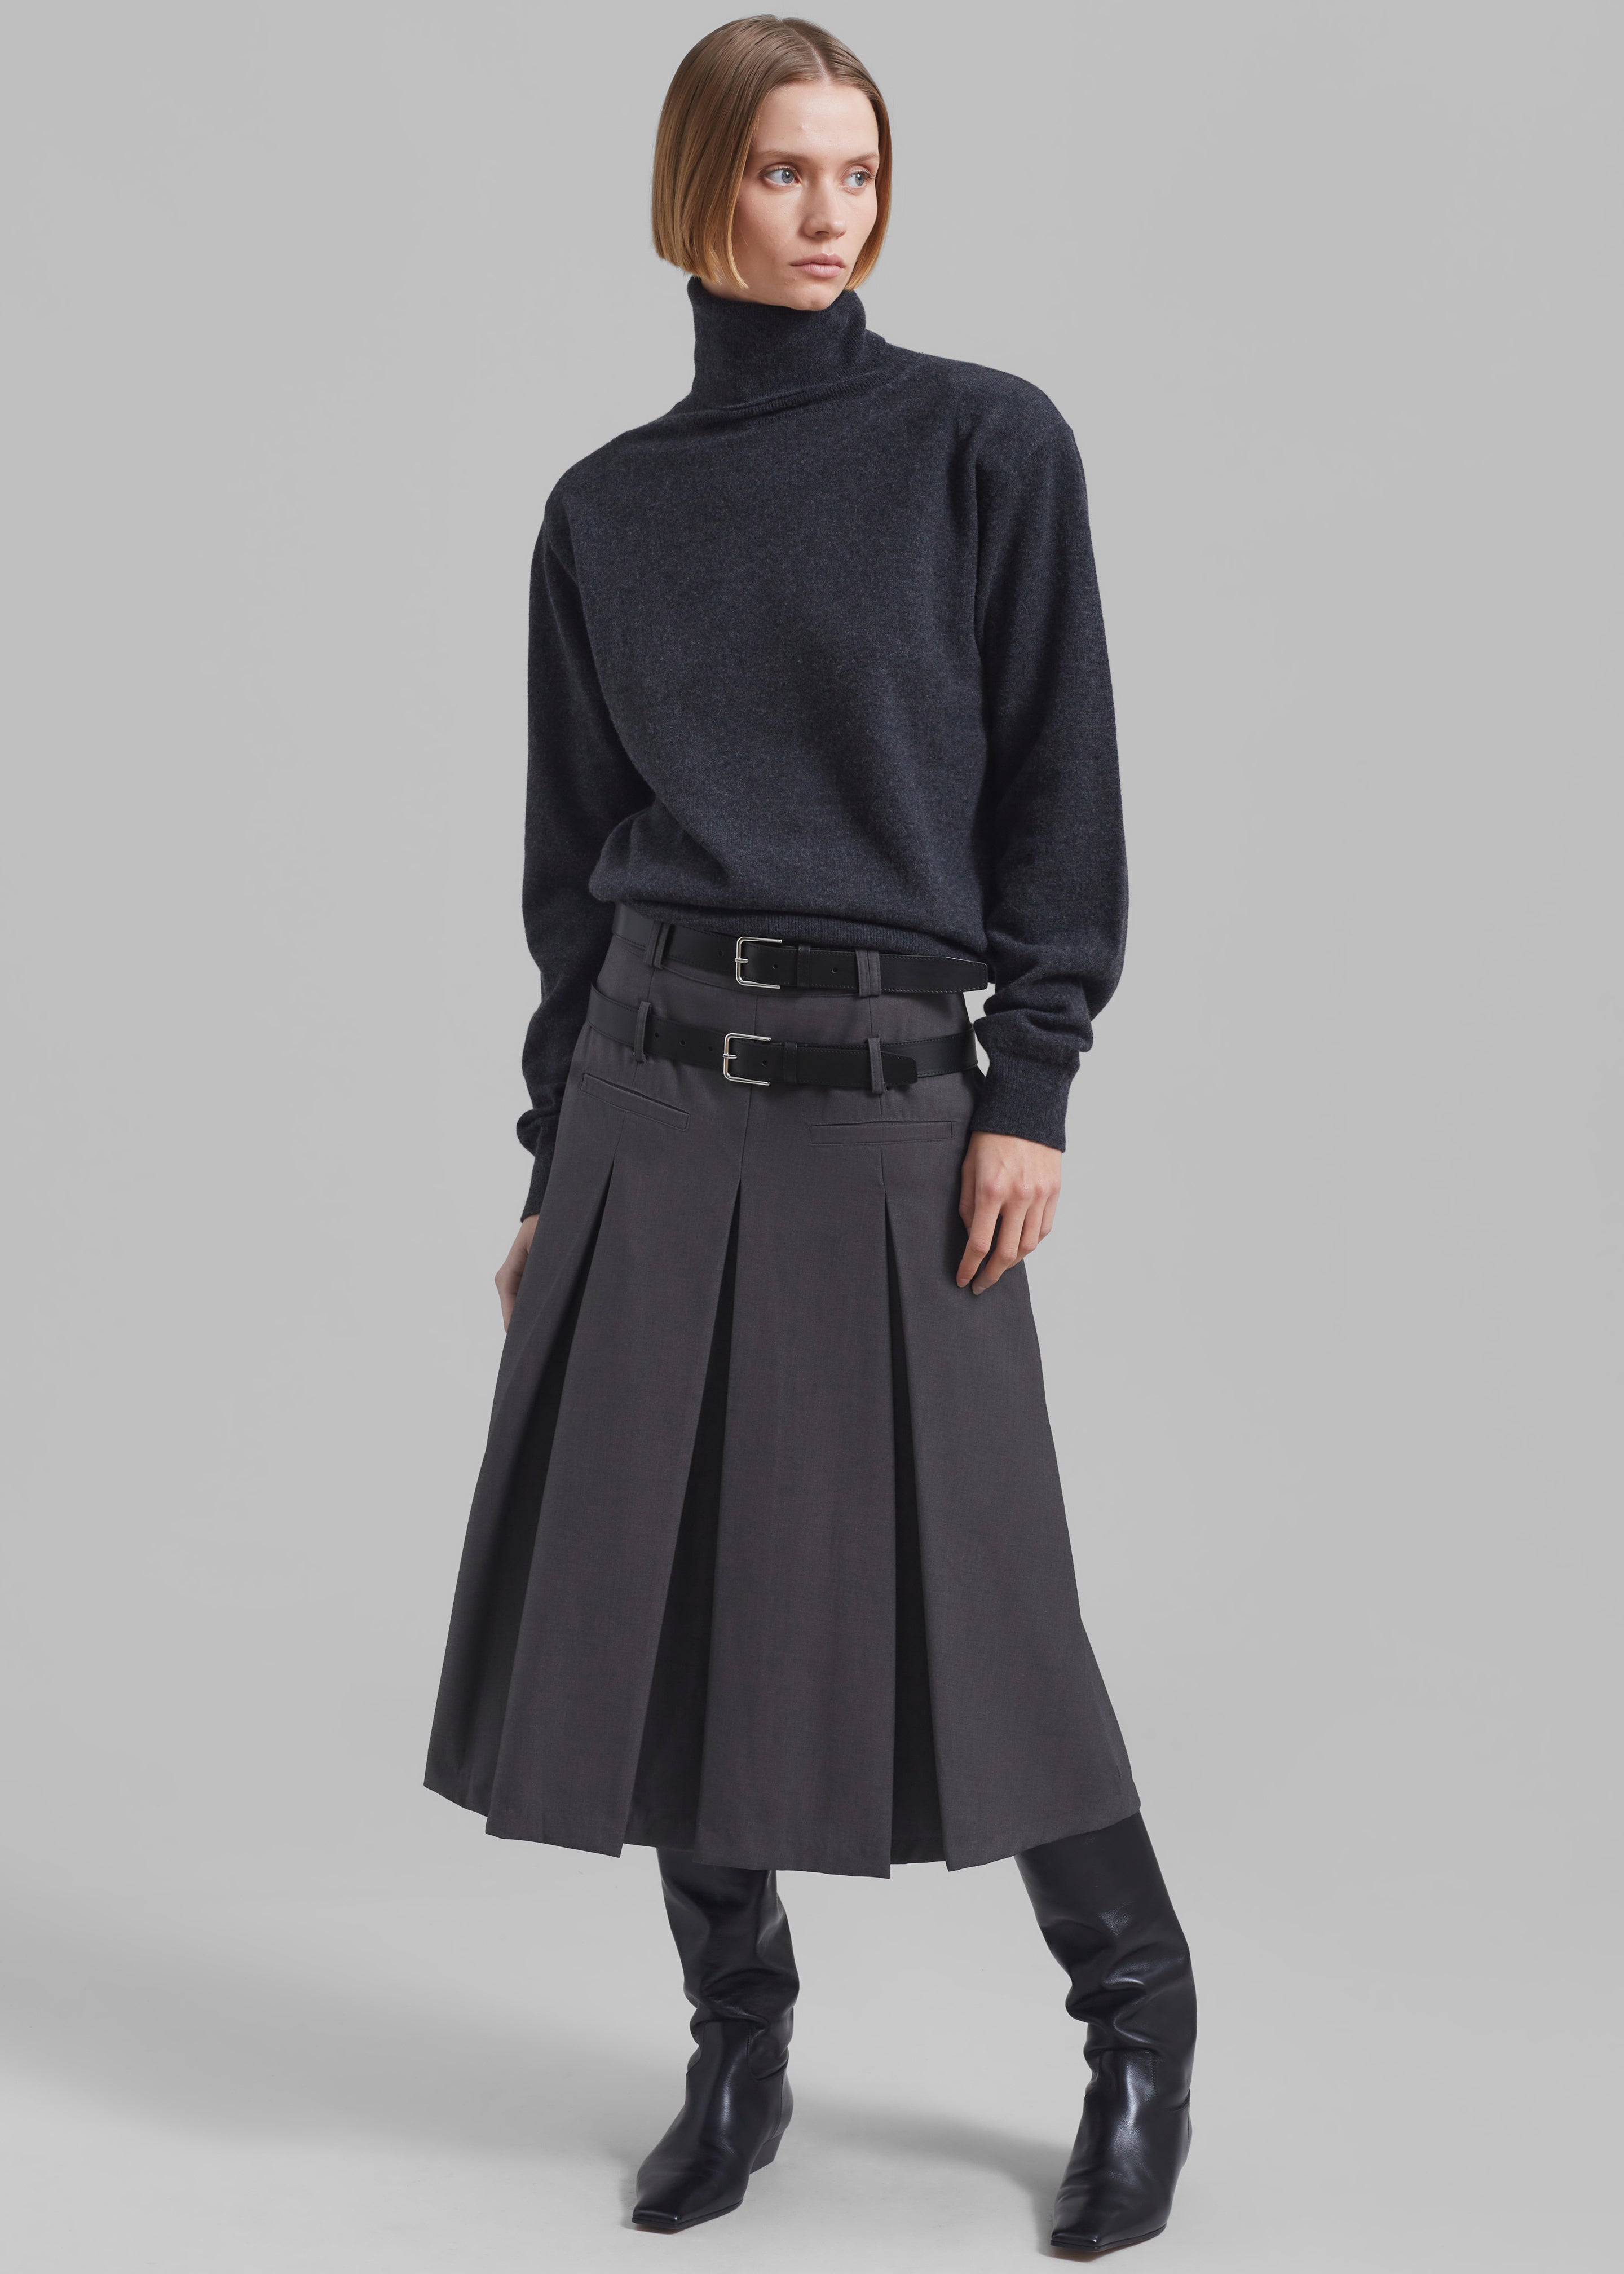 Ines Thin Padded Turtleneck - Charcoal - 10